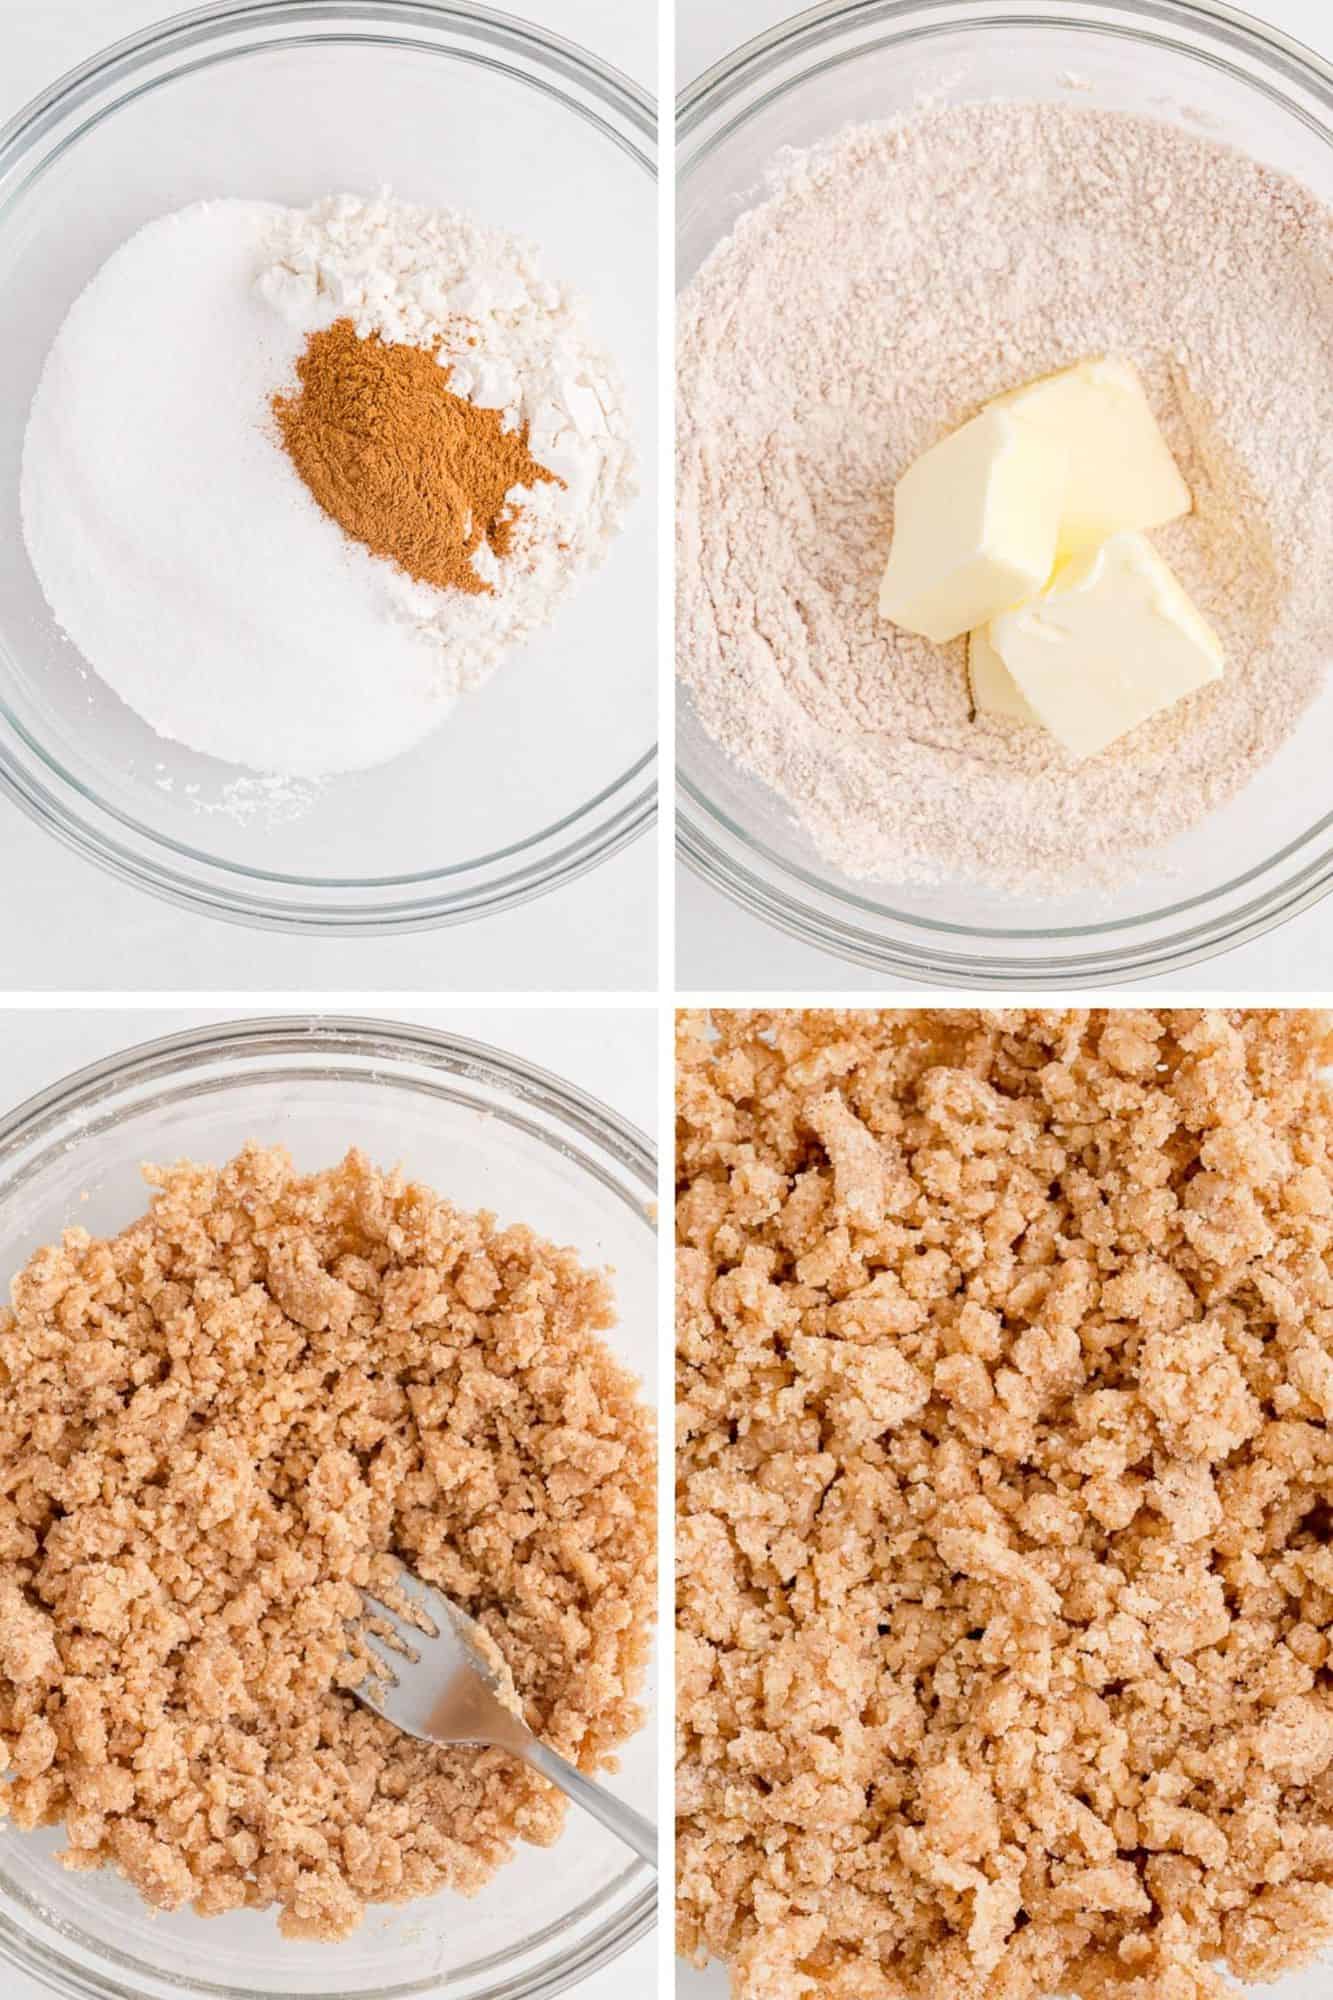 Four images showing how to make streusel.